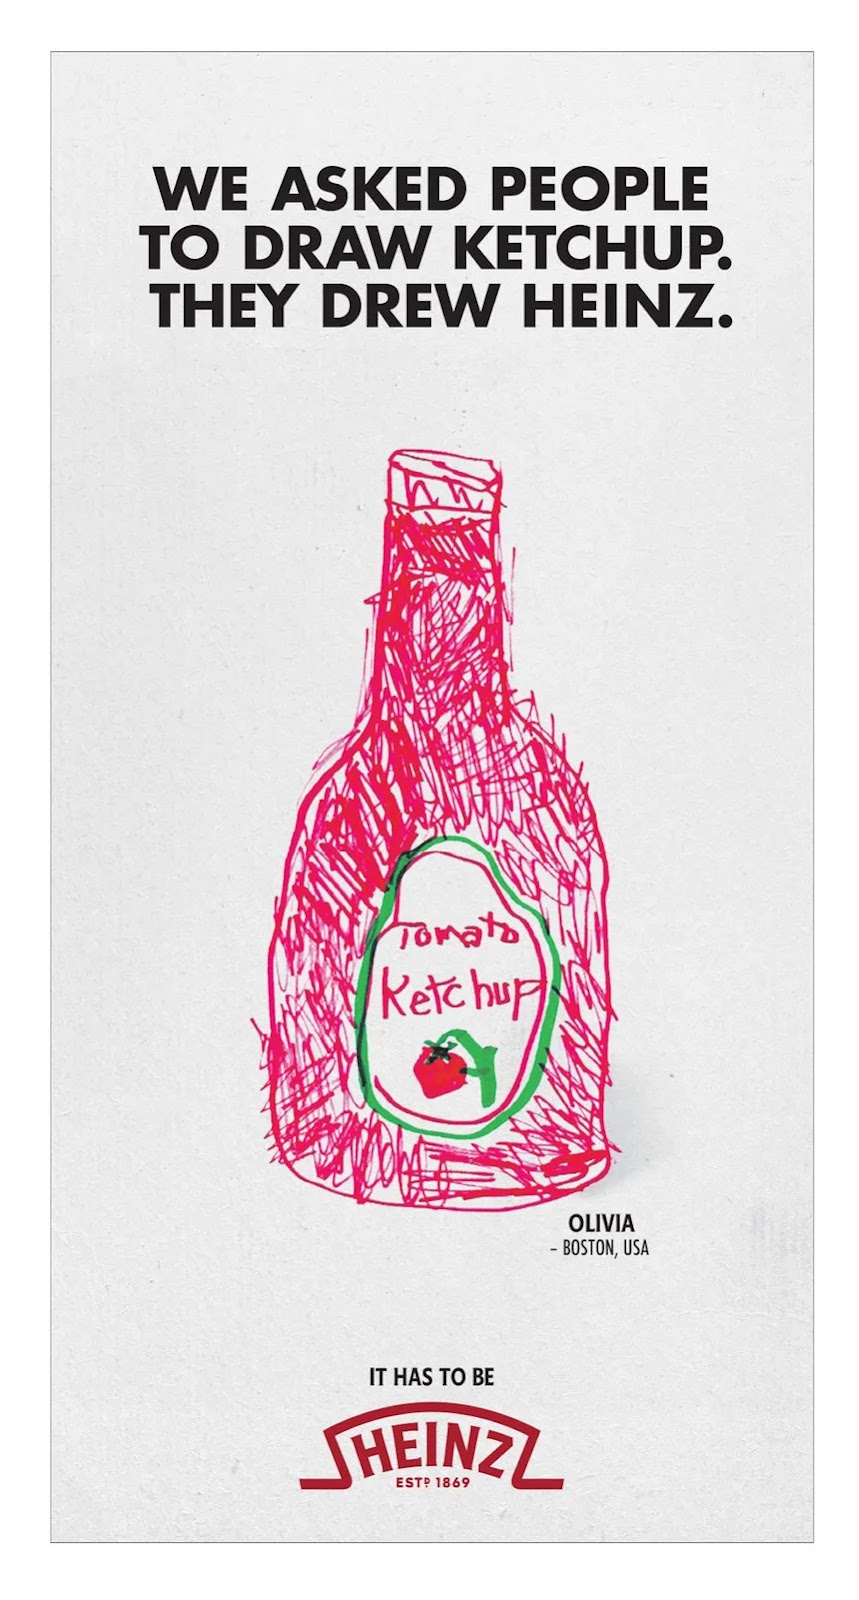 Heinz campaign with "We asked people to draw ketchup. They drew Heinz." copy